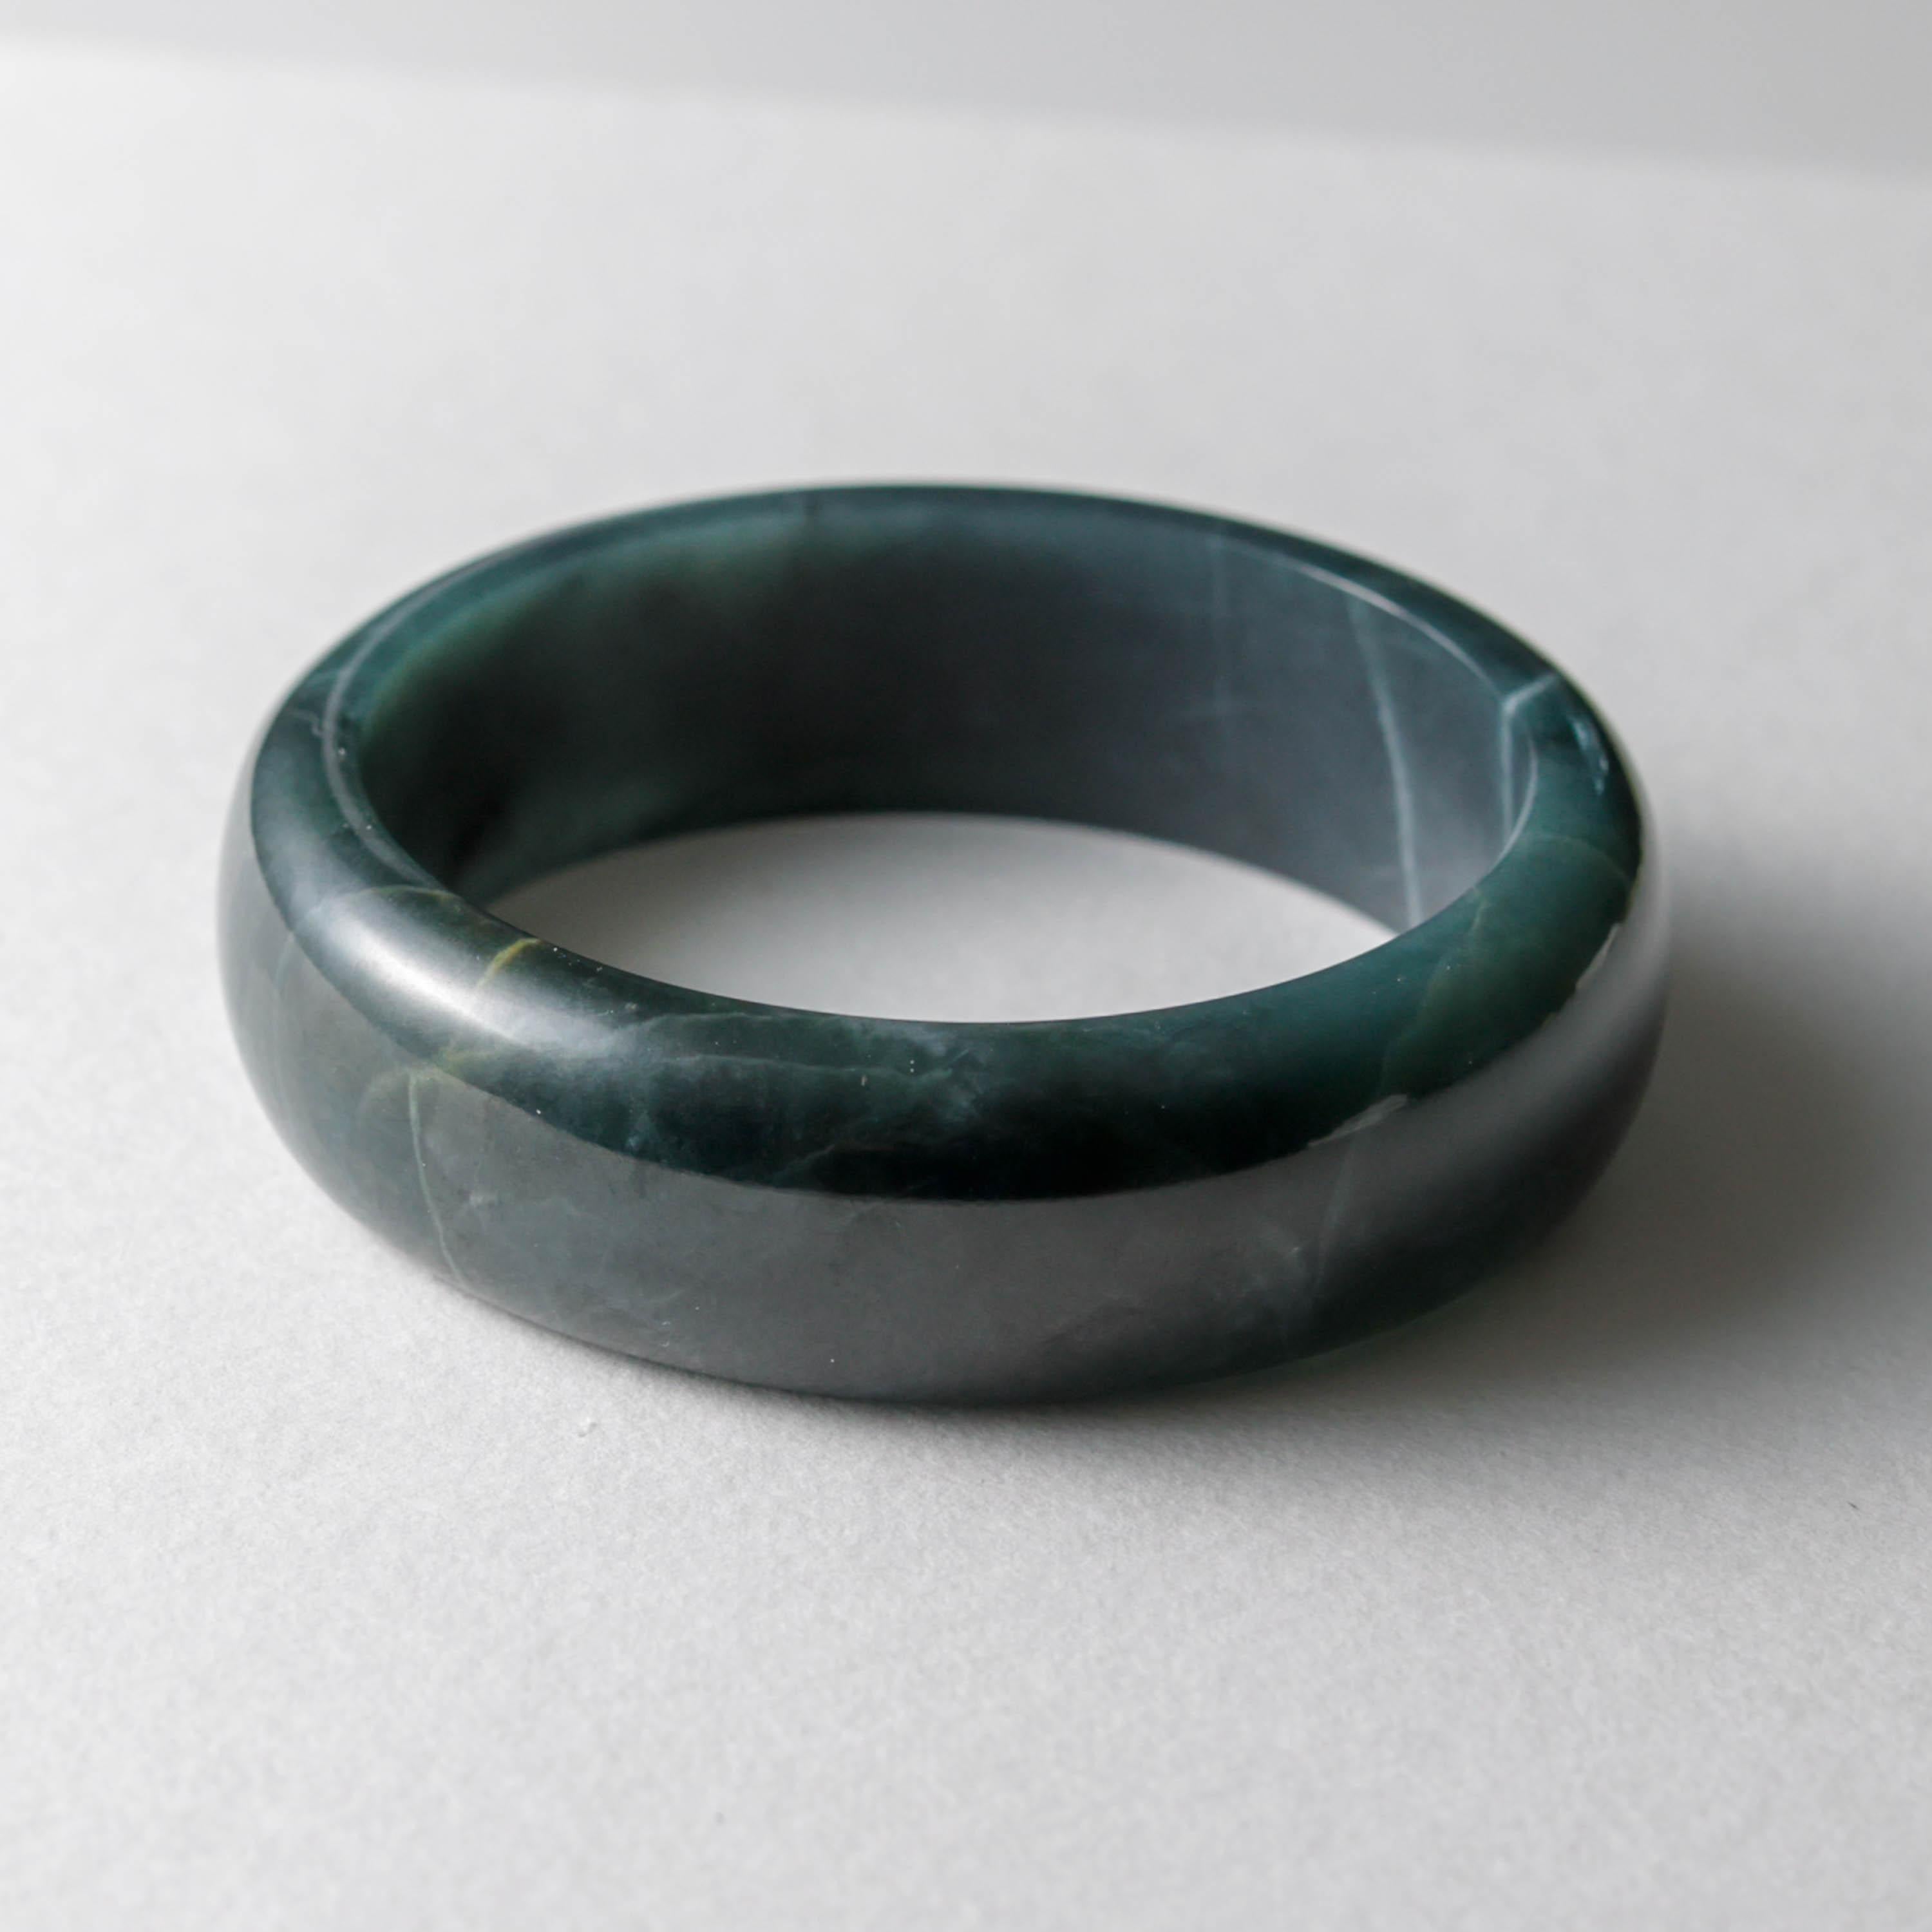 This is a large hand-carved jadeite bangle in extremely rare Guatemala blue jadeite jade. The bangle has an outer diameter of 89mm and an opening of 70mm, meaning it will fit a man with fairly large hands. It's 23.78mm wide and about 10mm thick.